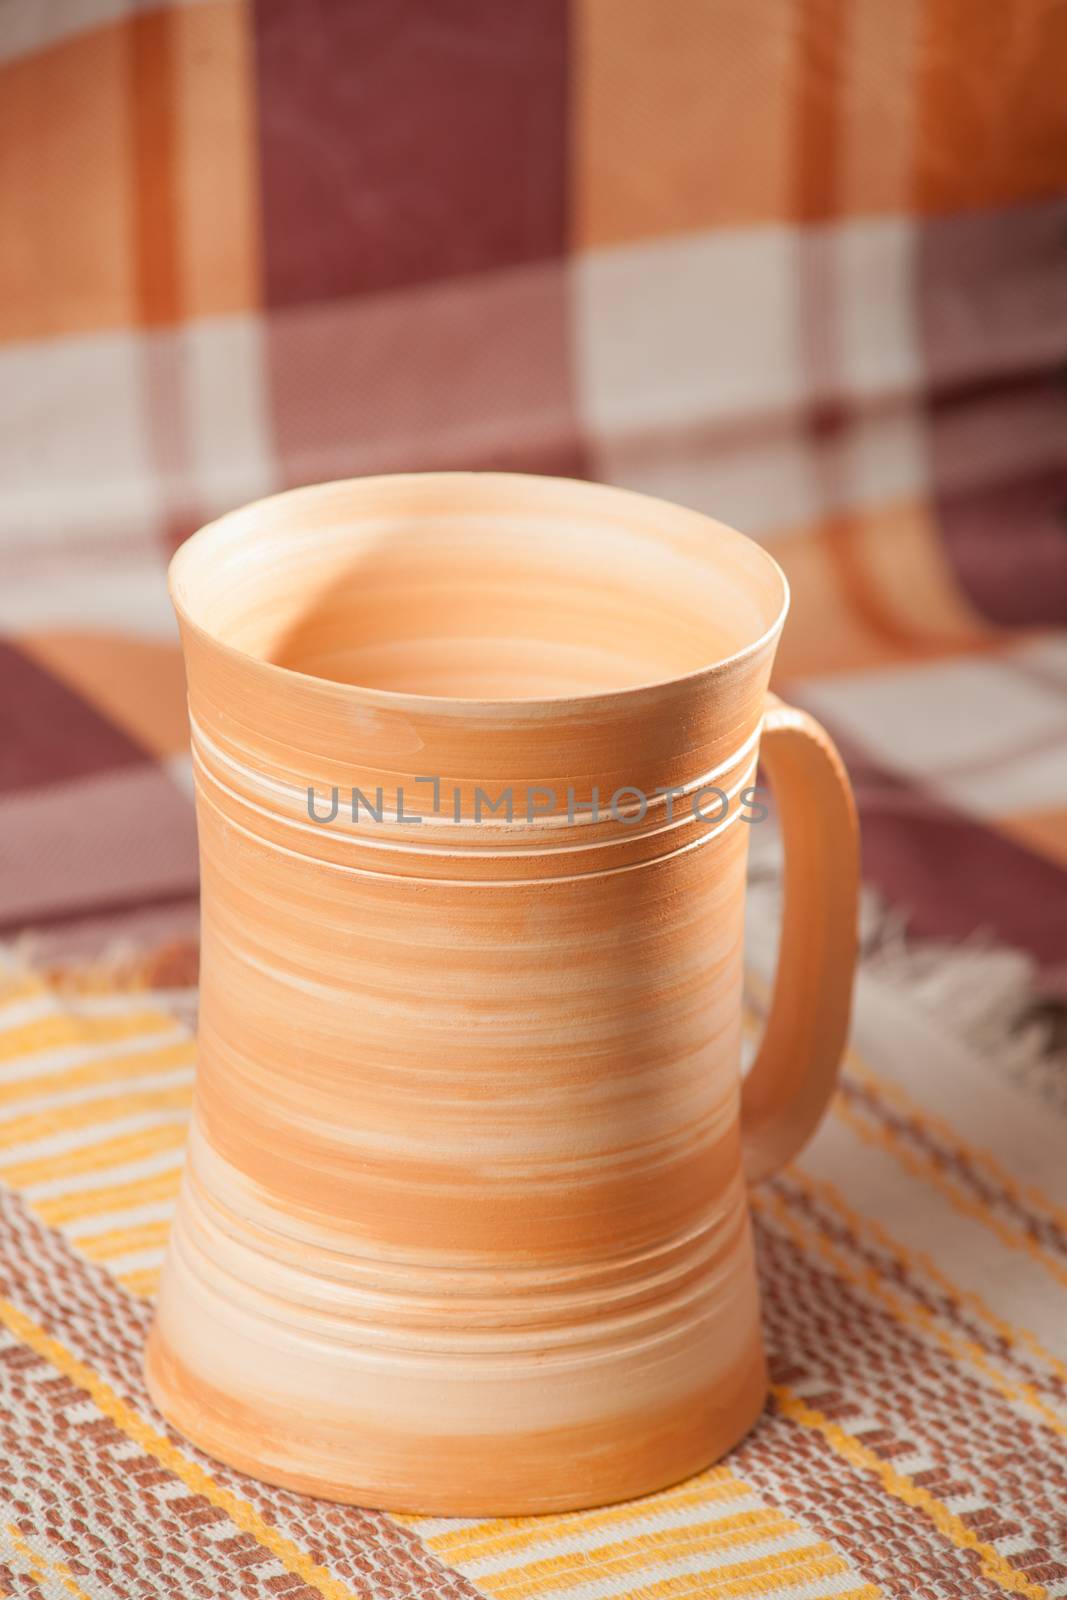 Traditional handcrafted mug on the multycolor background